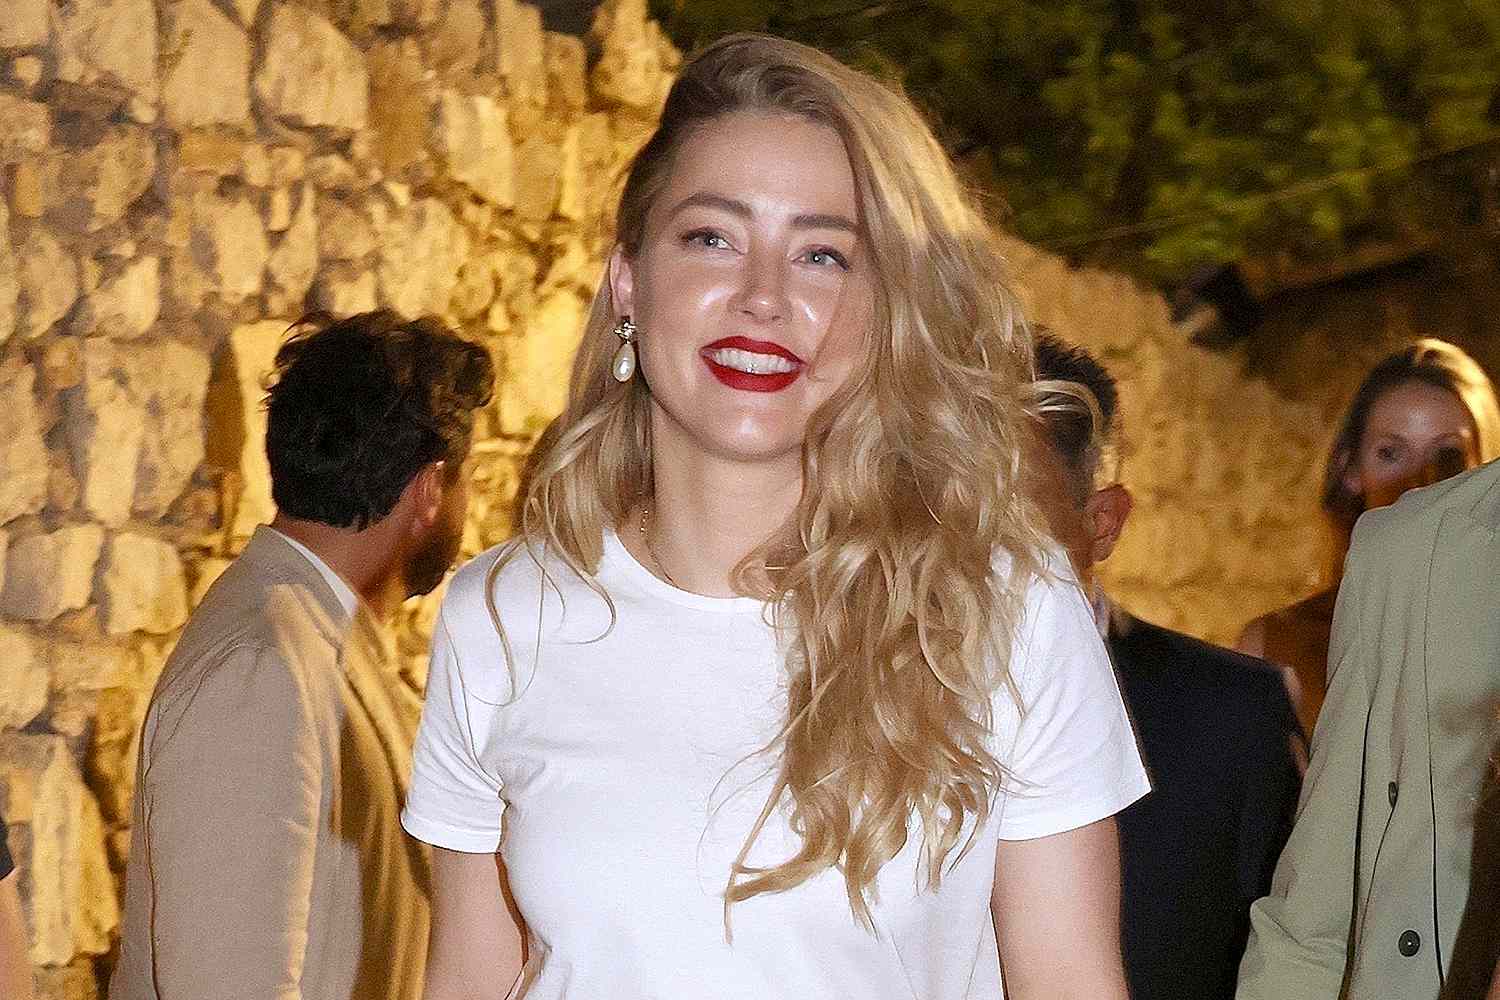 Amber Heard Attends Taormina Film Festival Marking Her First Public Appearance After Defamation Trial